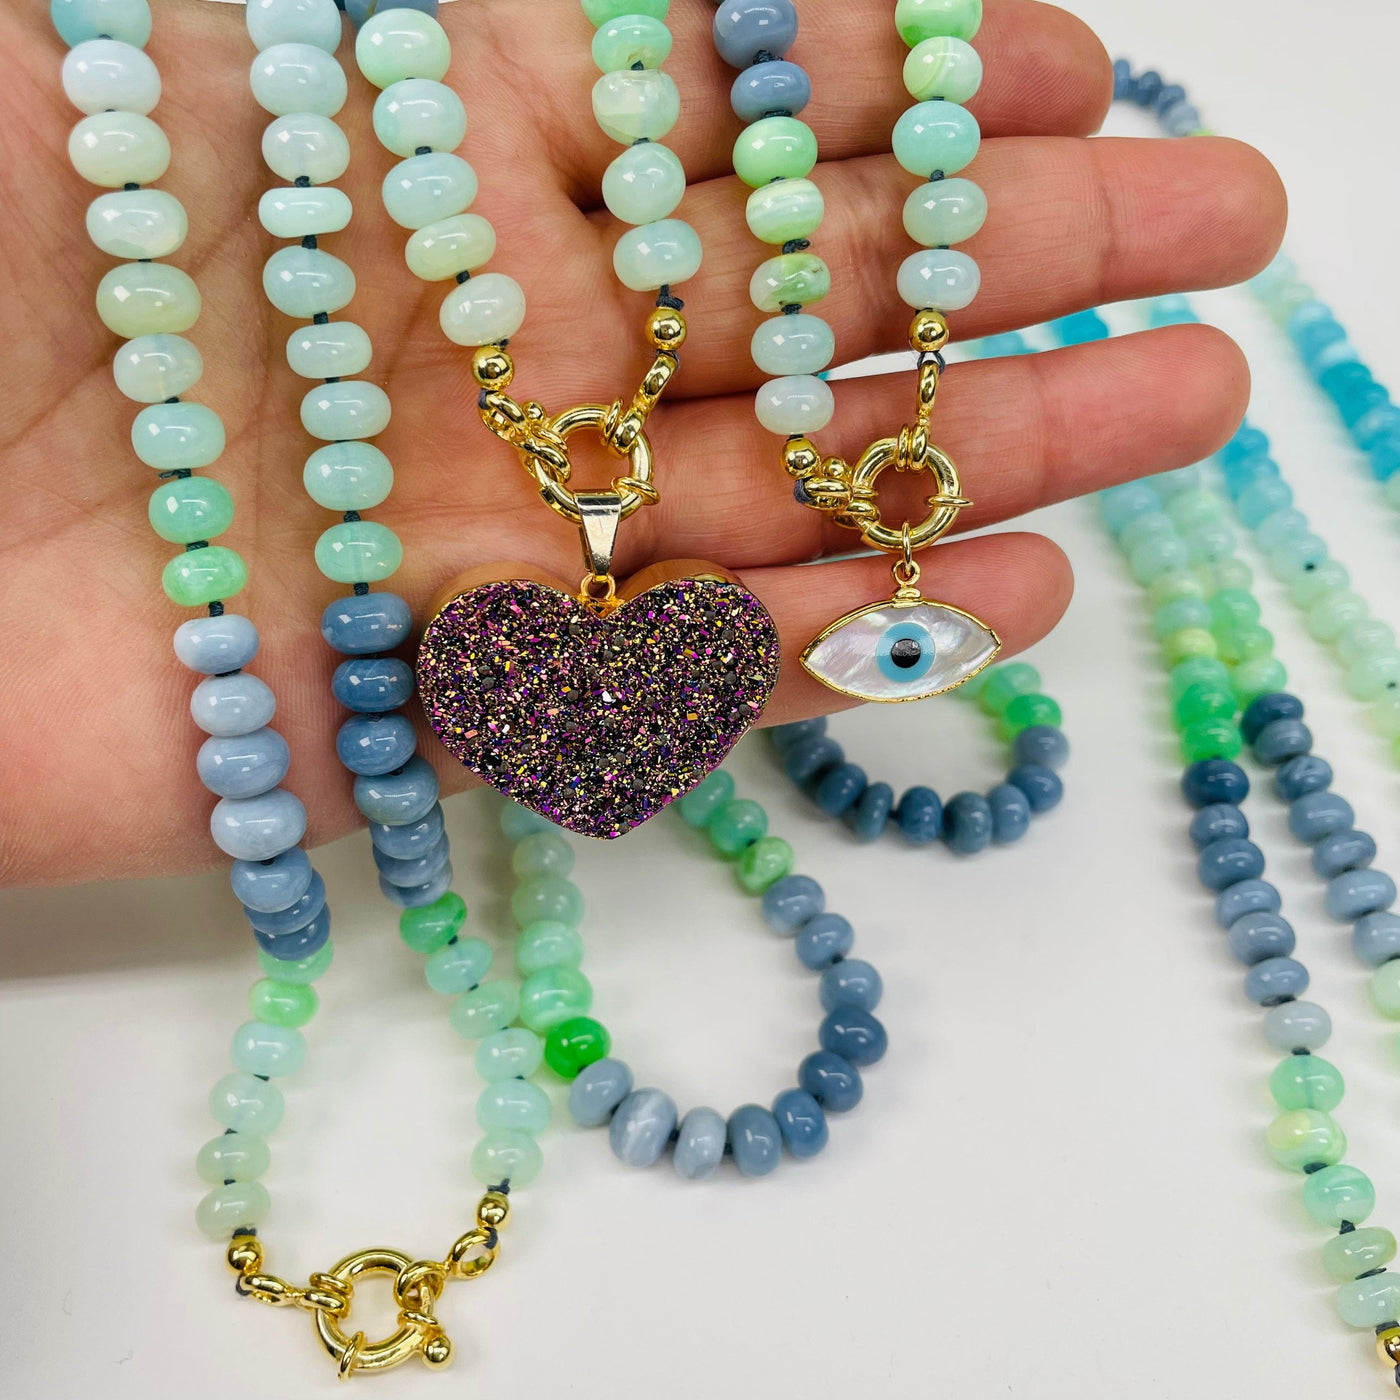 necklaces displayed with candy charms 